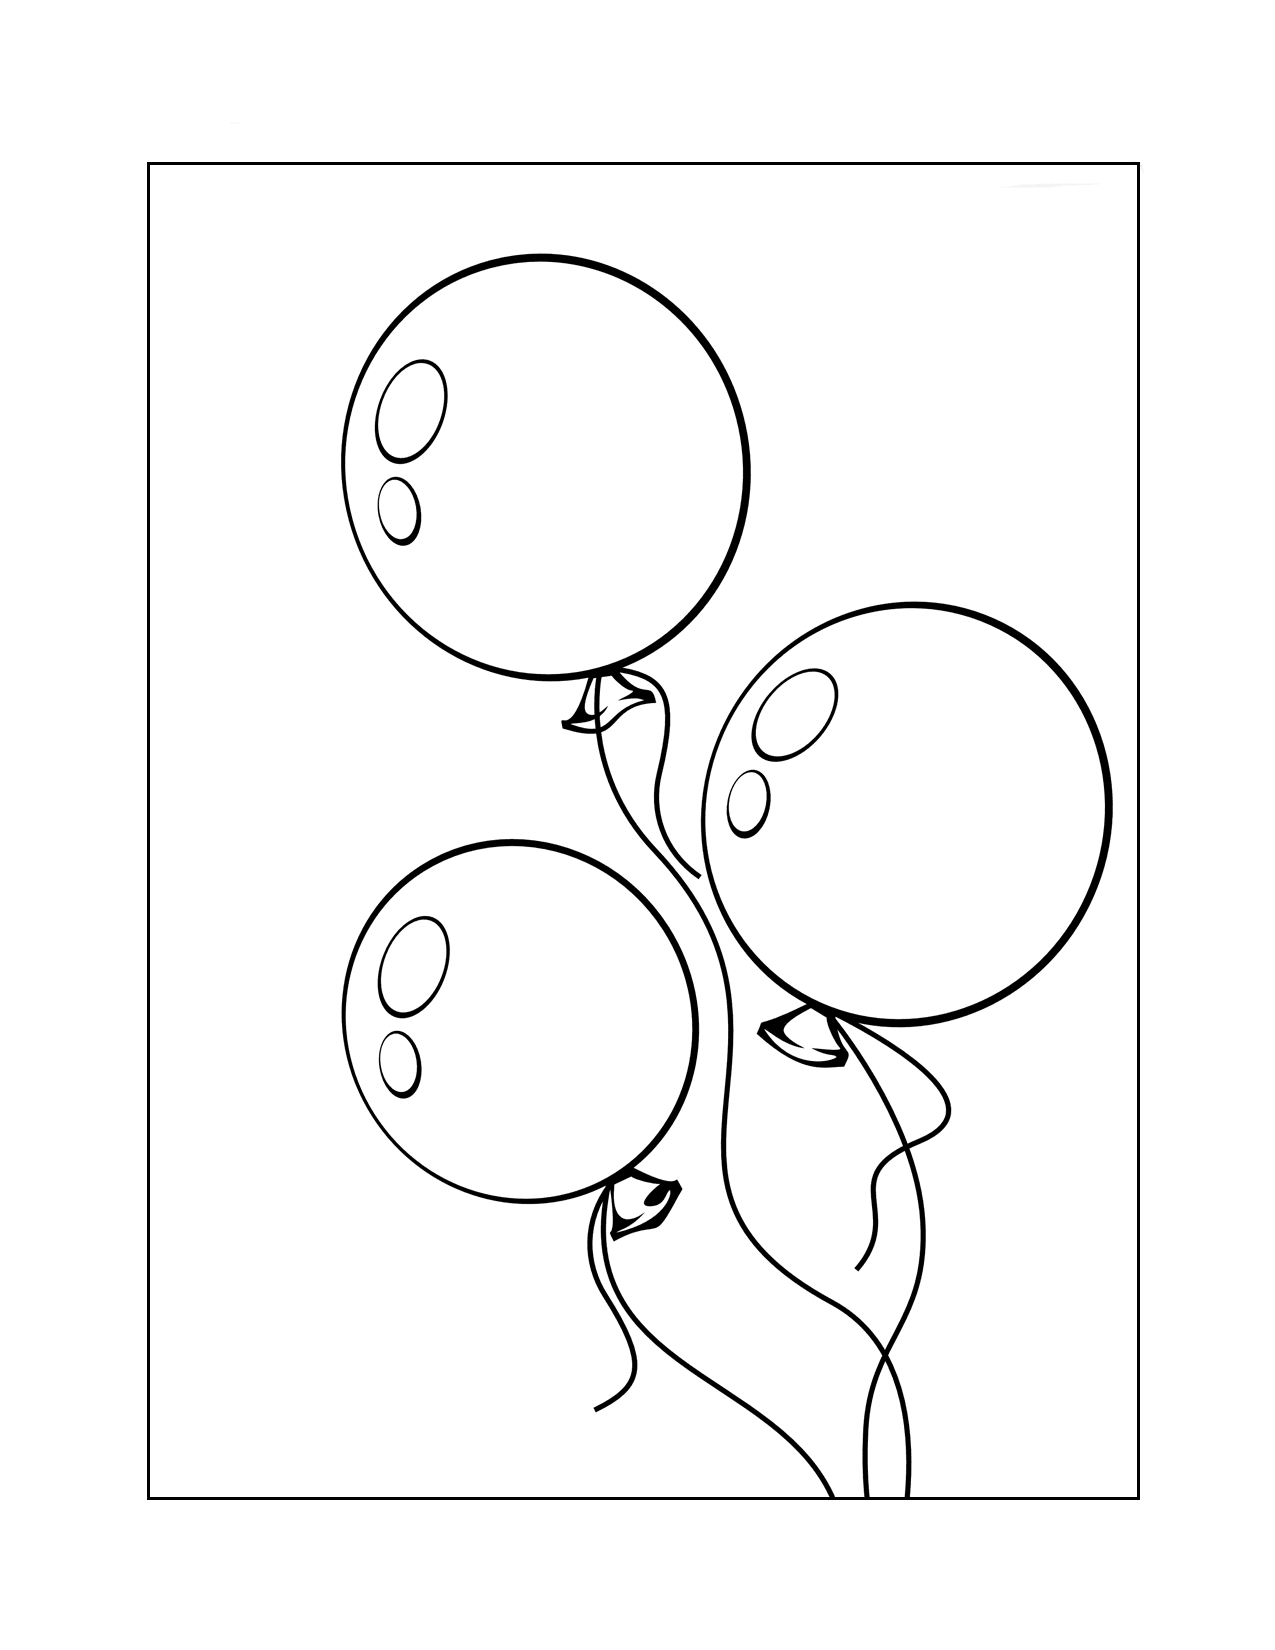 3 Balloons Coloring Page